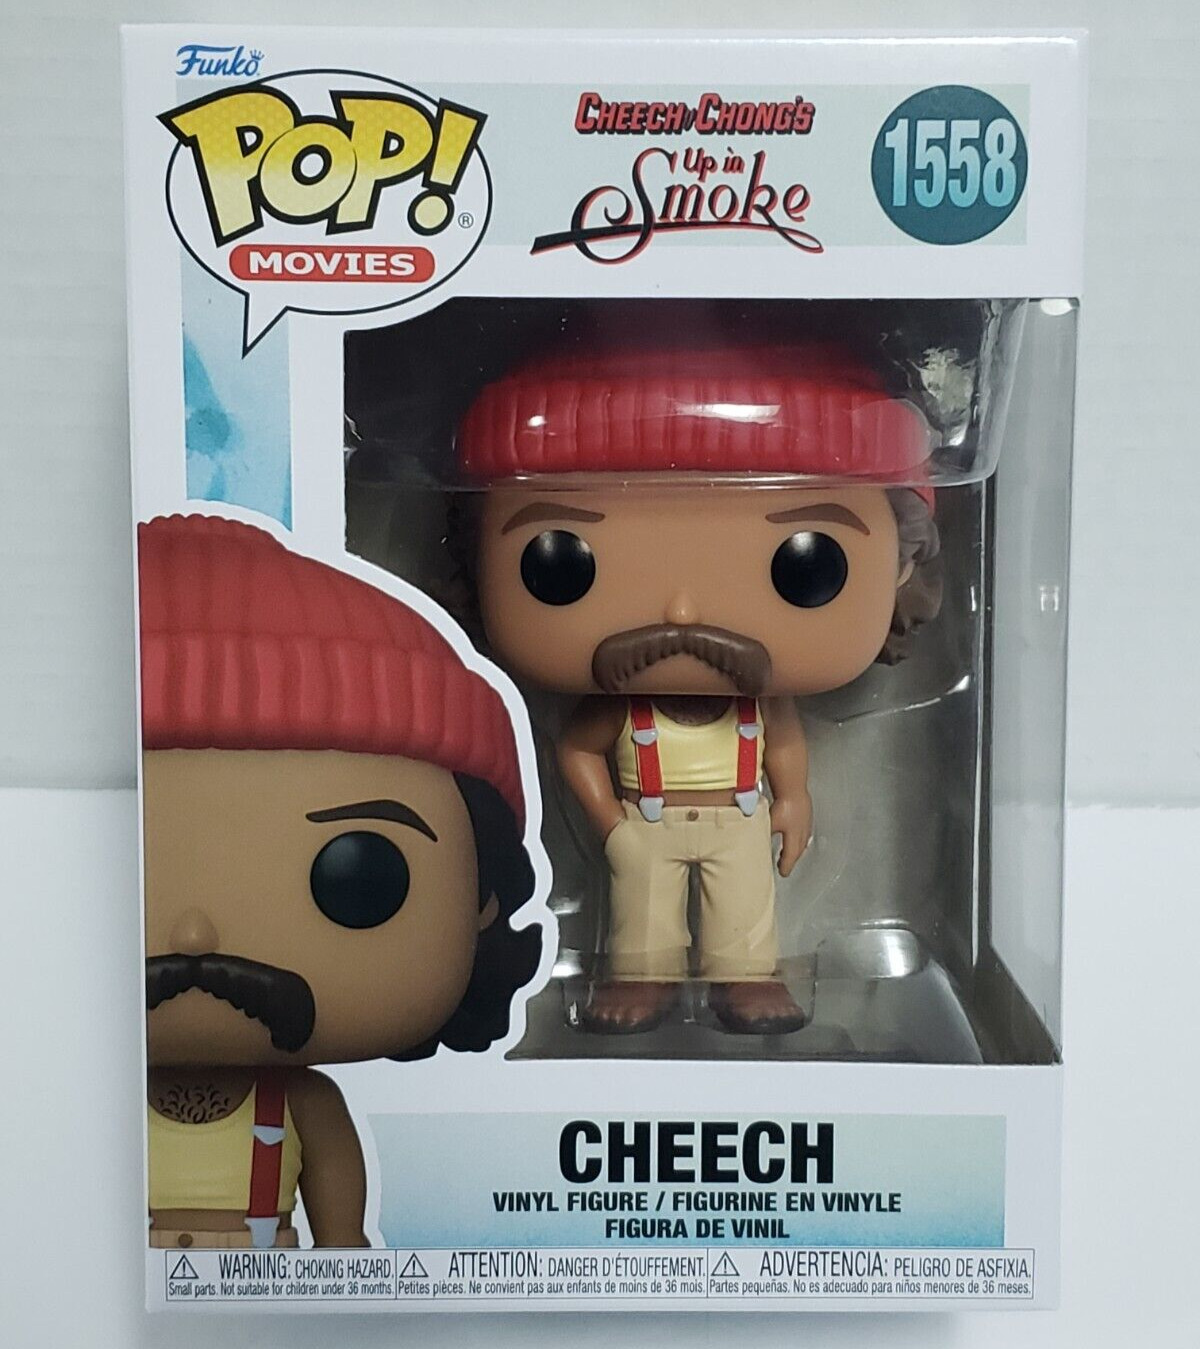 CHEECH - UP IN SMOKE - Funko POP Movies #1558 Collectible Vinyl Figure IN STOCK